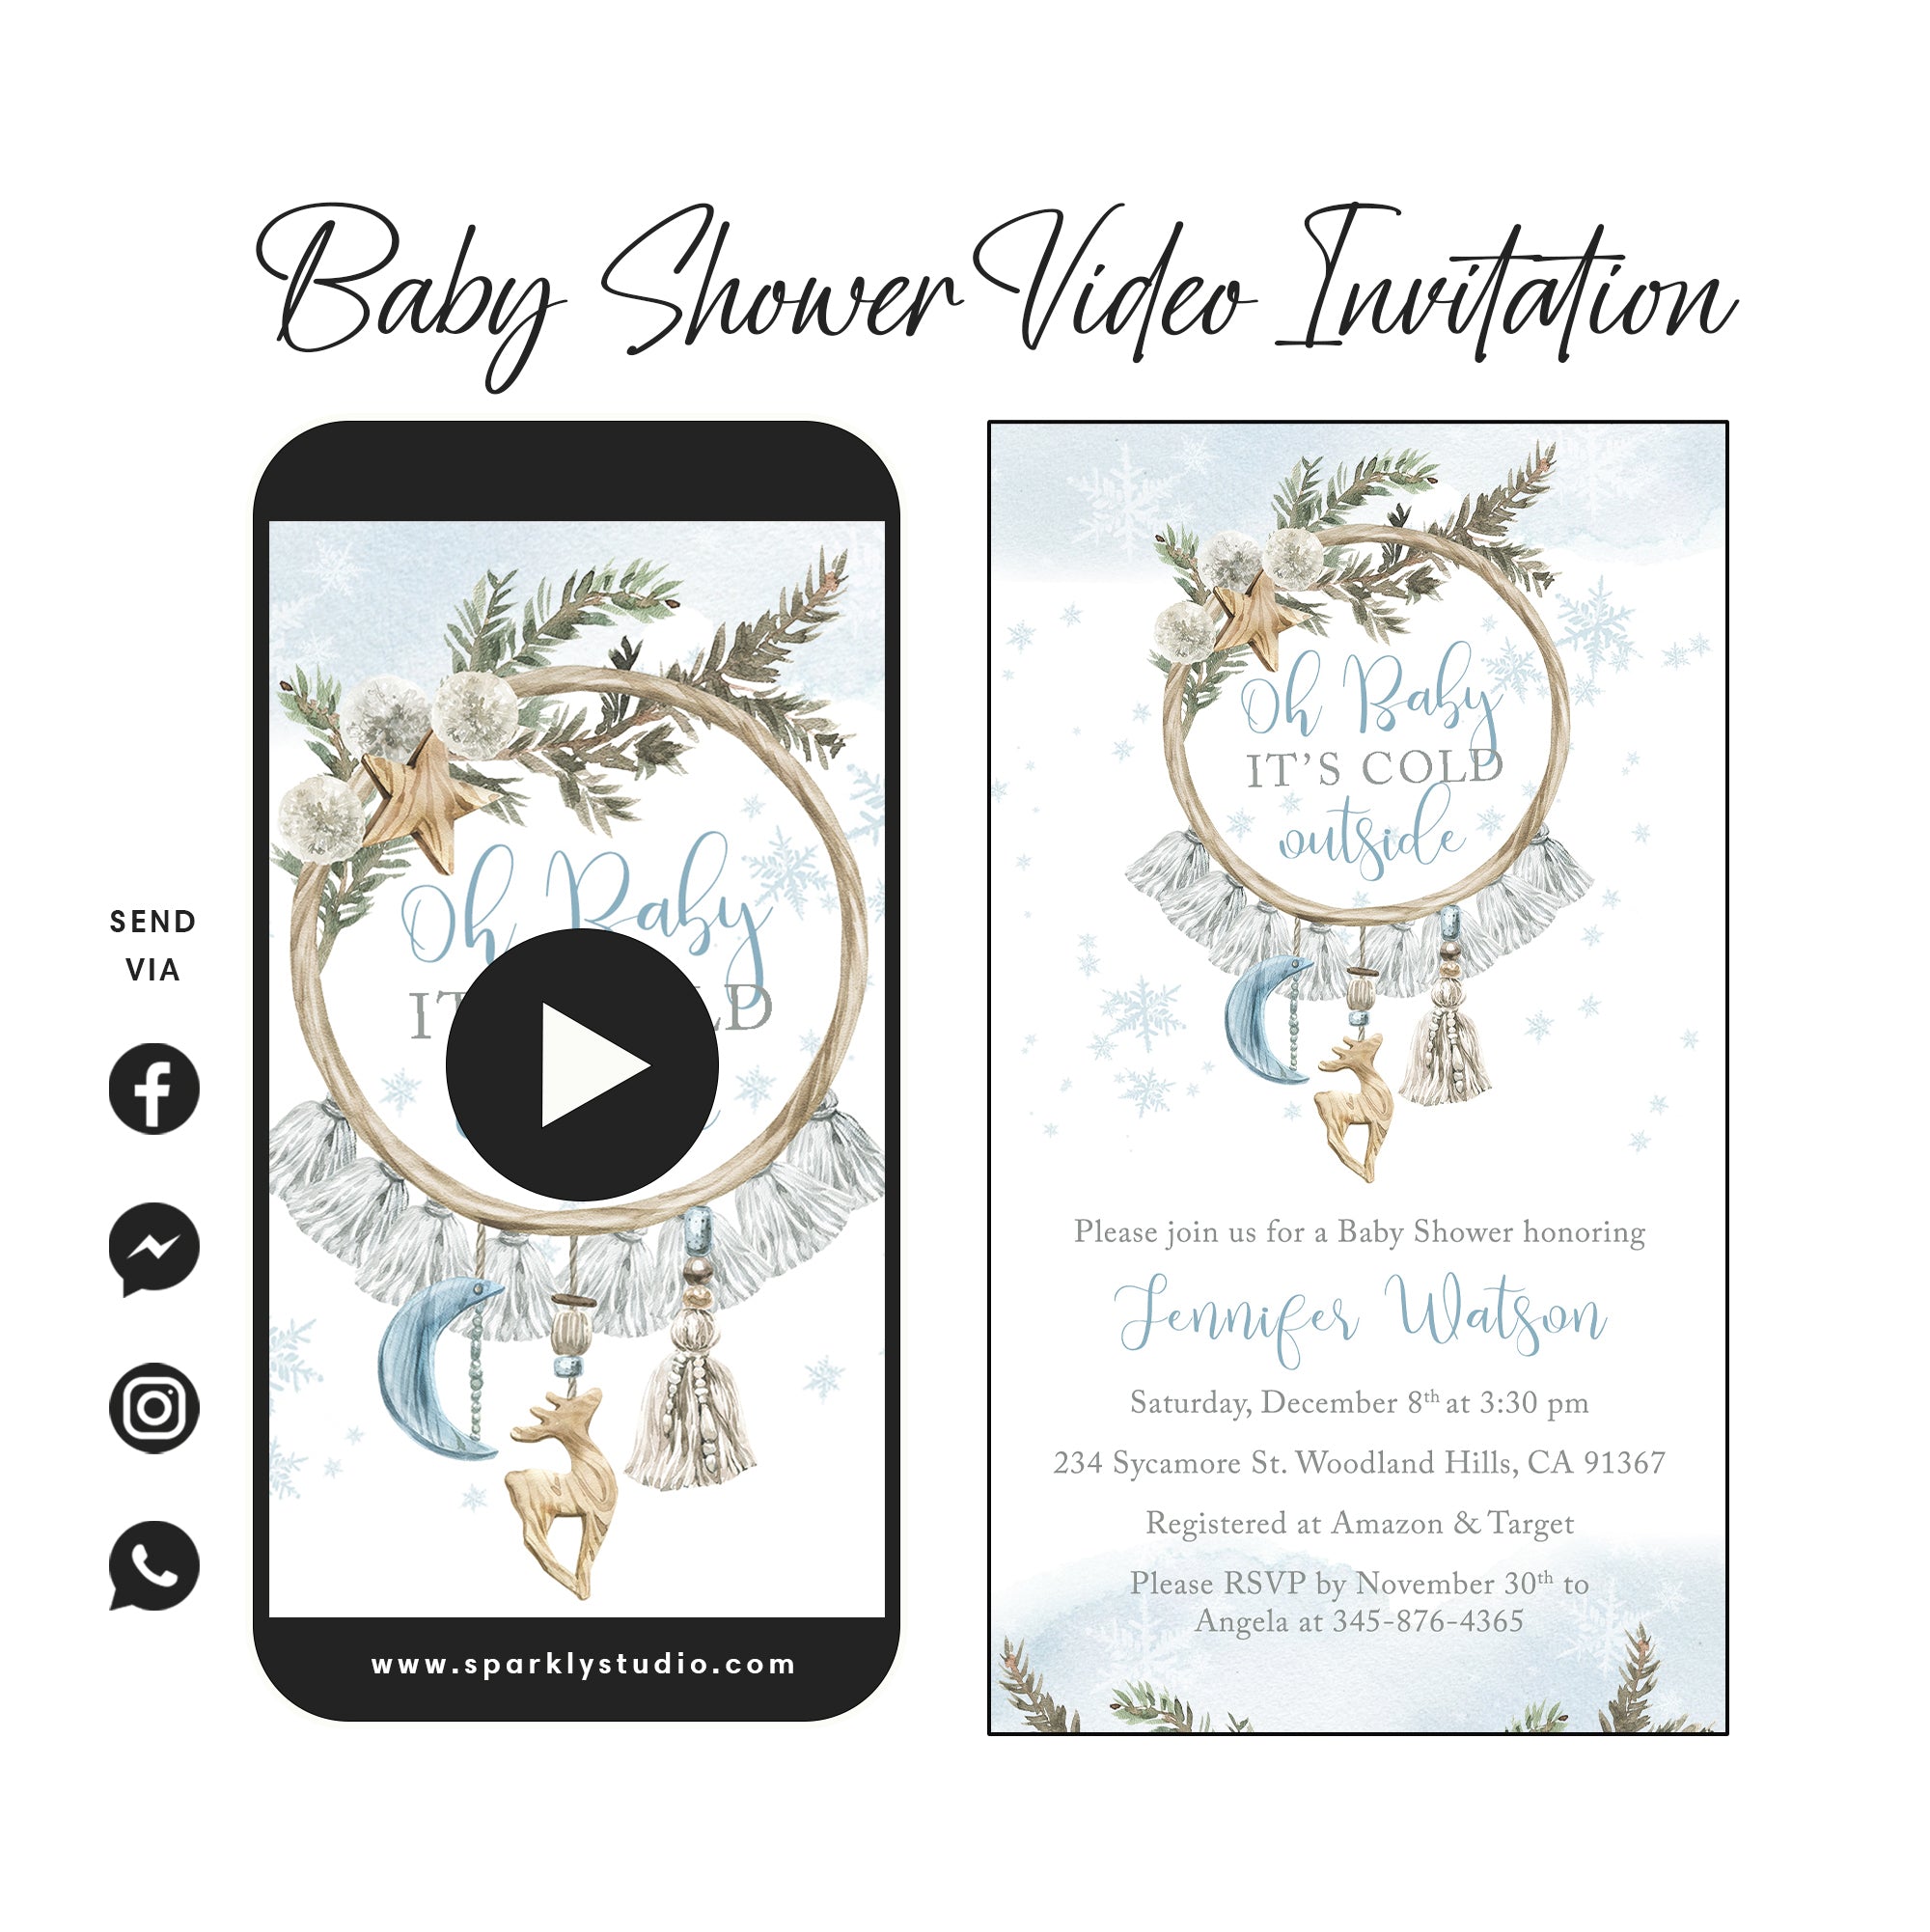 Baby It's Cold Outside Baby Shower Video Invitation